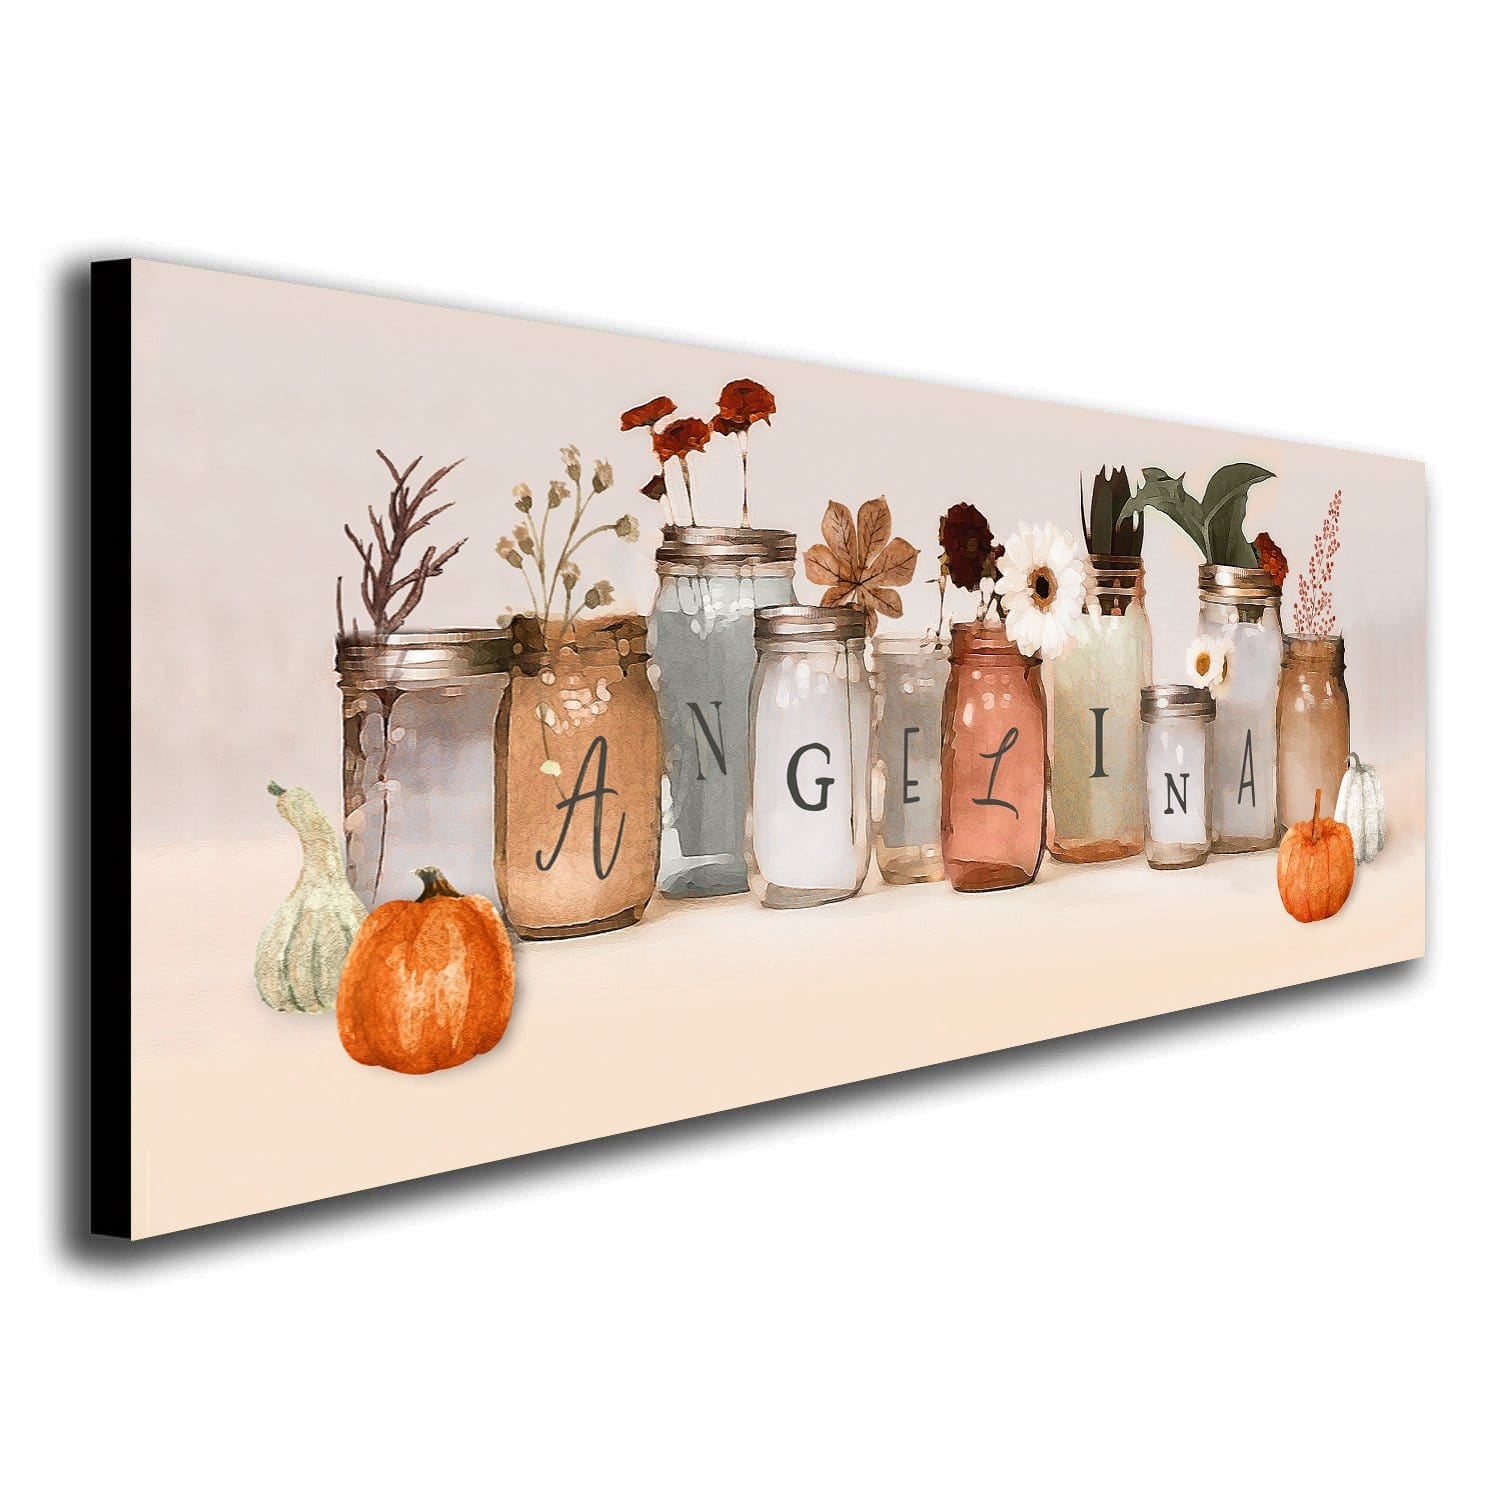 Personalized Fall gift - Fall decor with your name in the art from Personal Prints